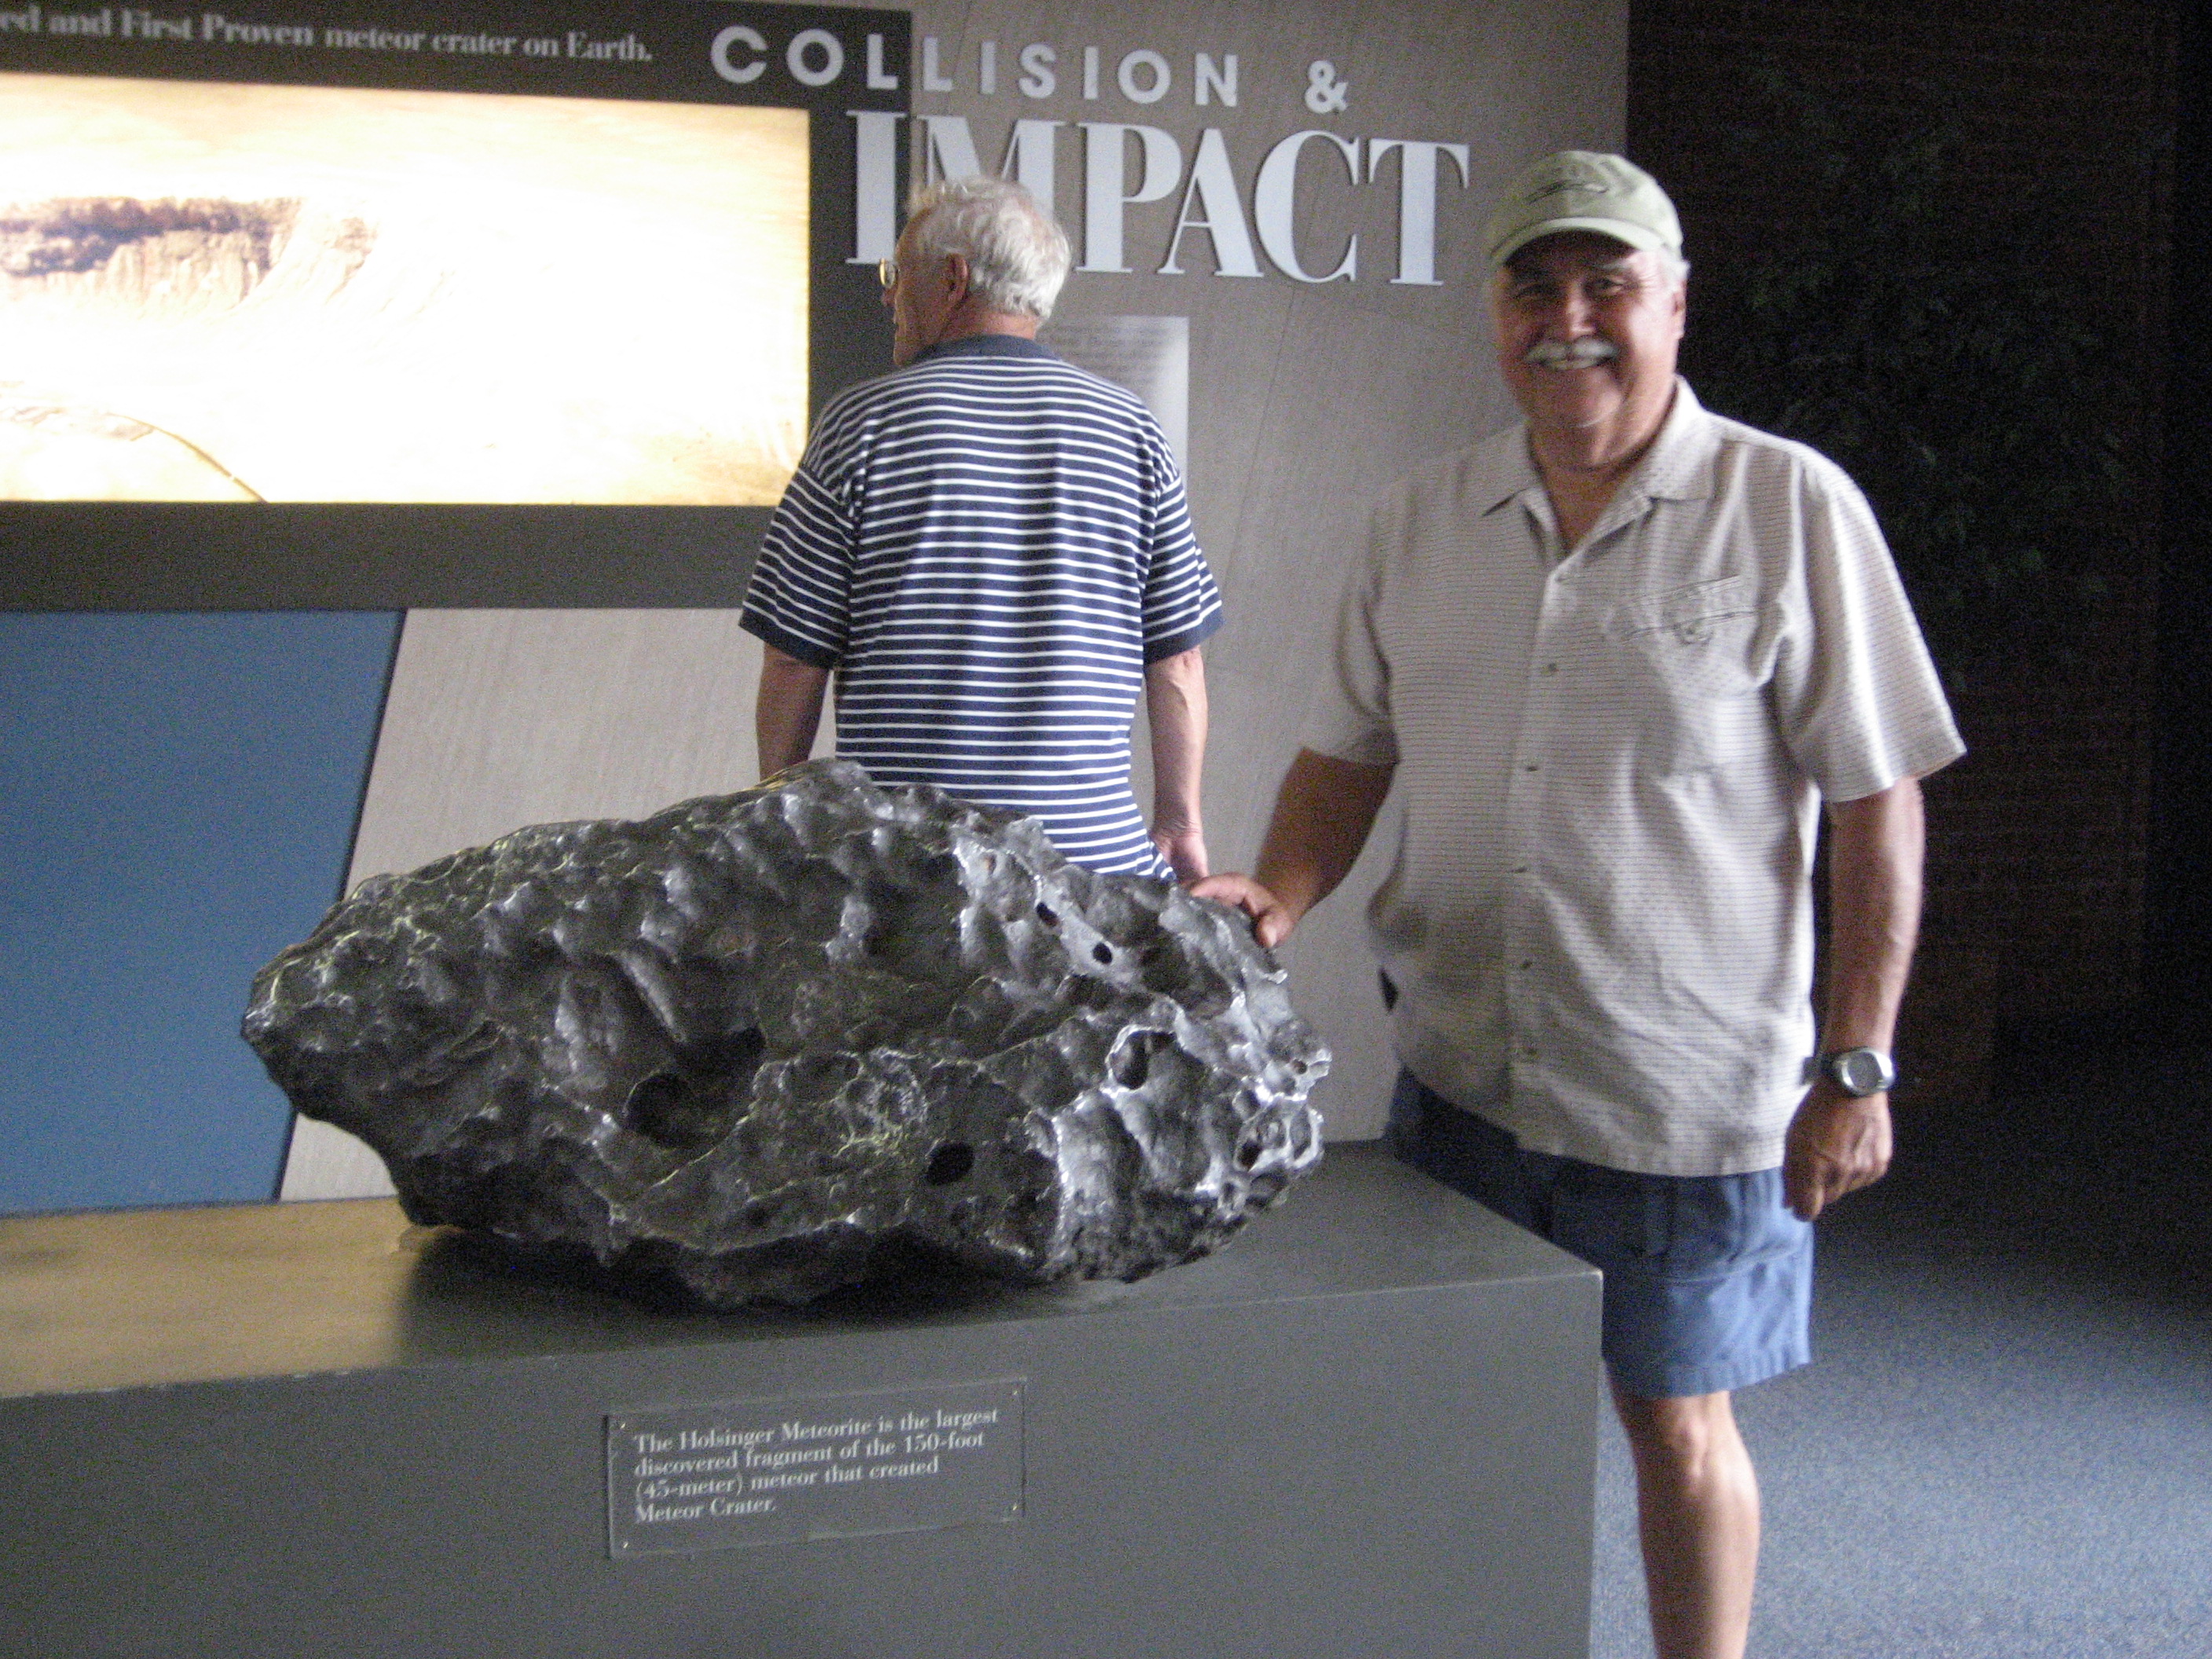 Largest fragment left from the meteor.